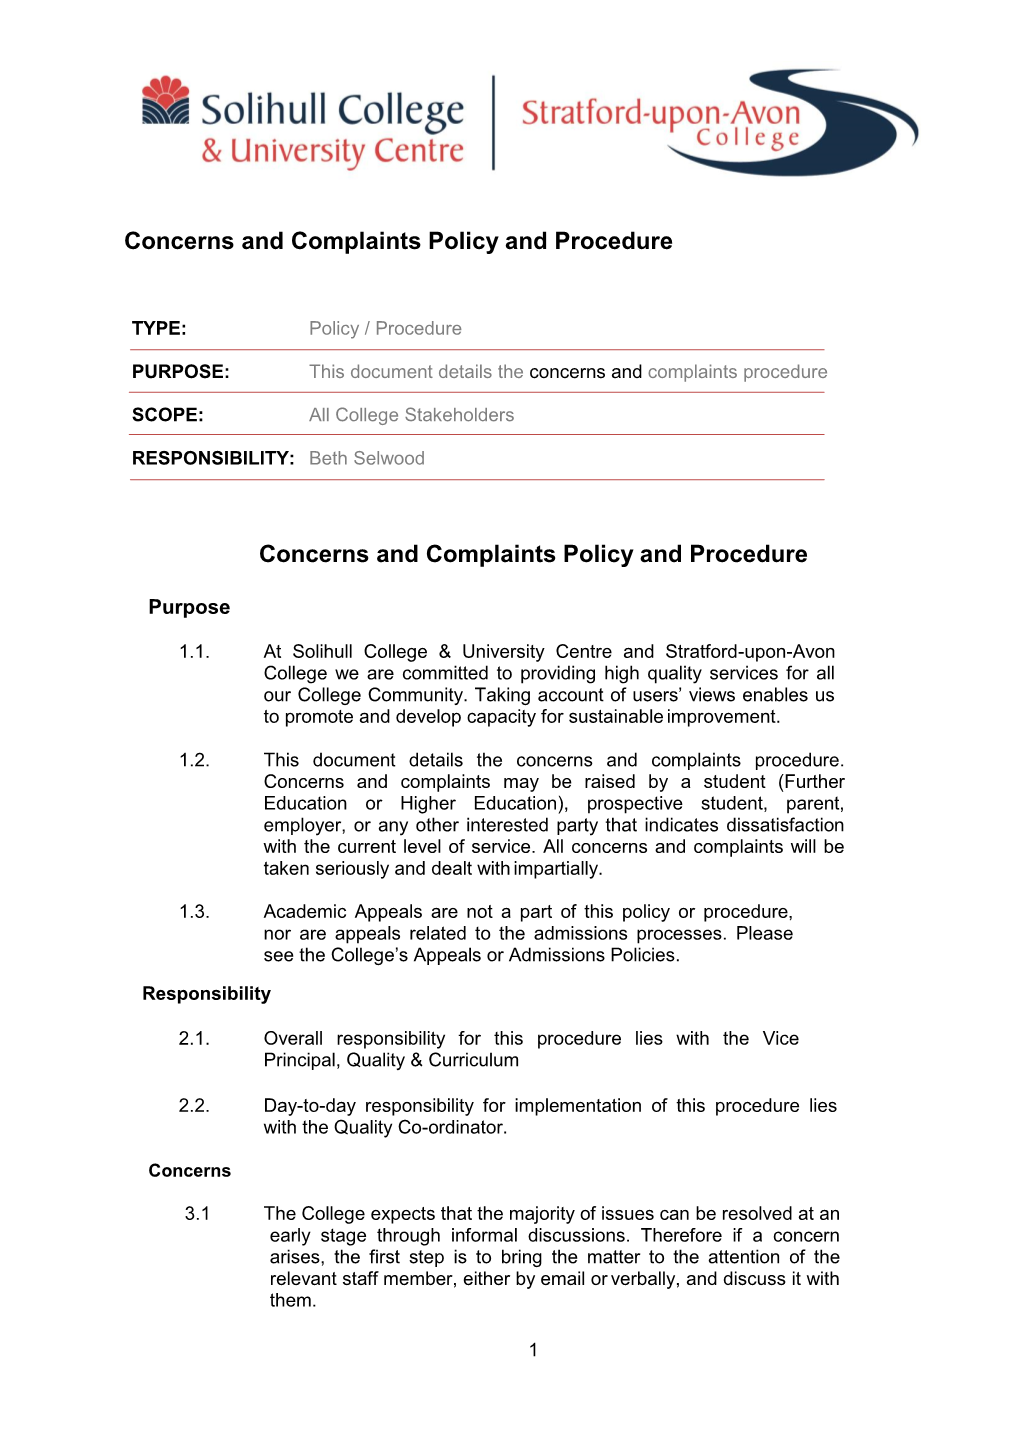 Concerns and Complaints Policy and Procedure